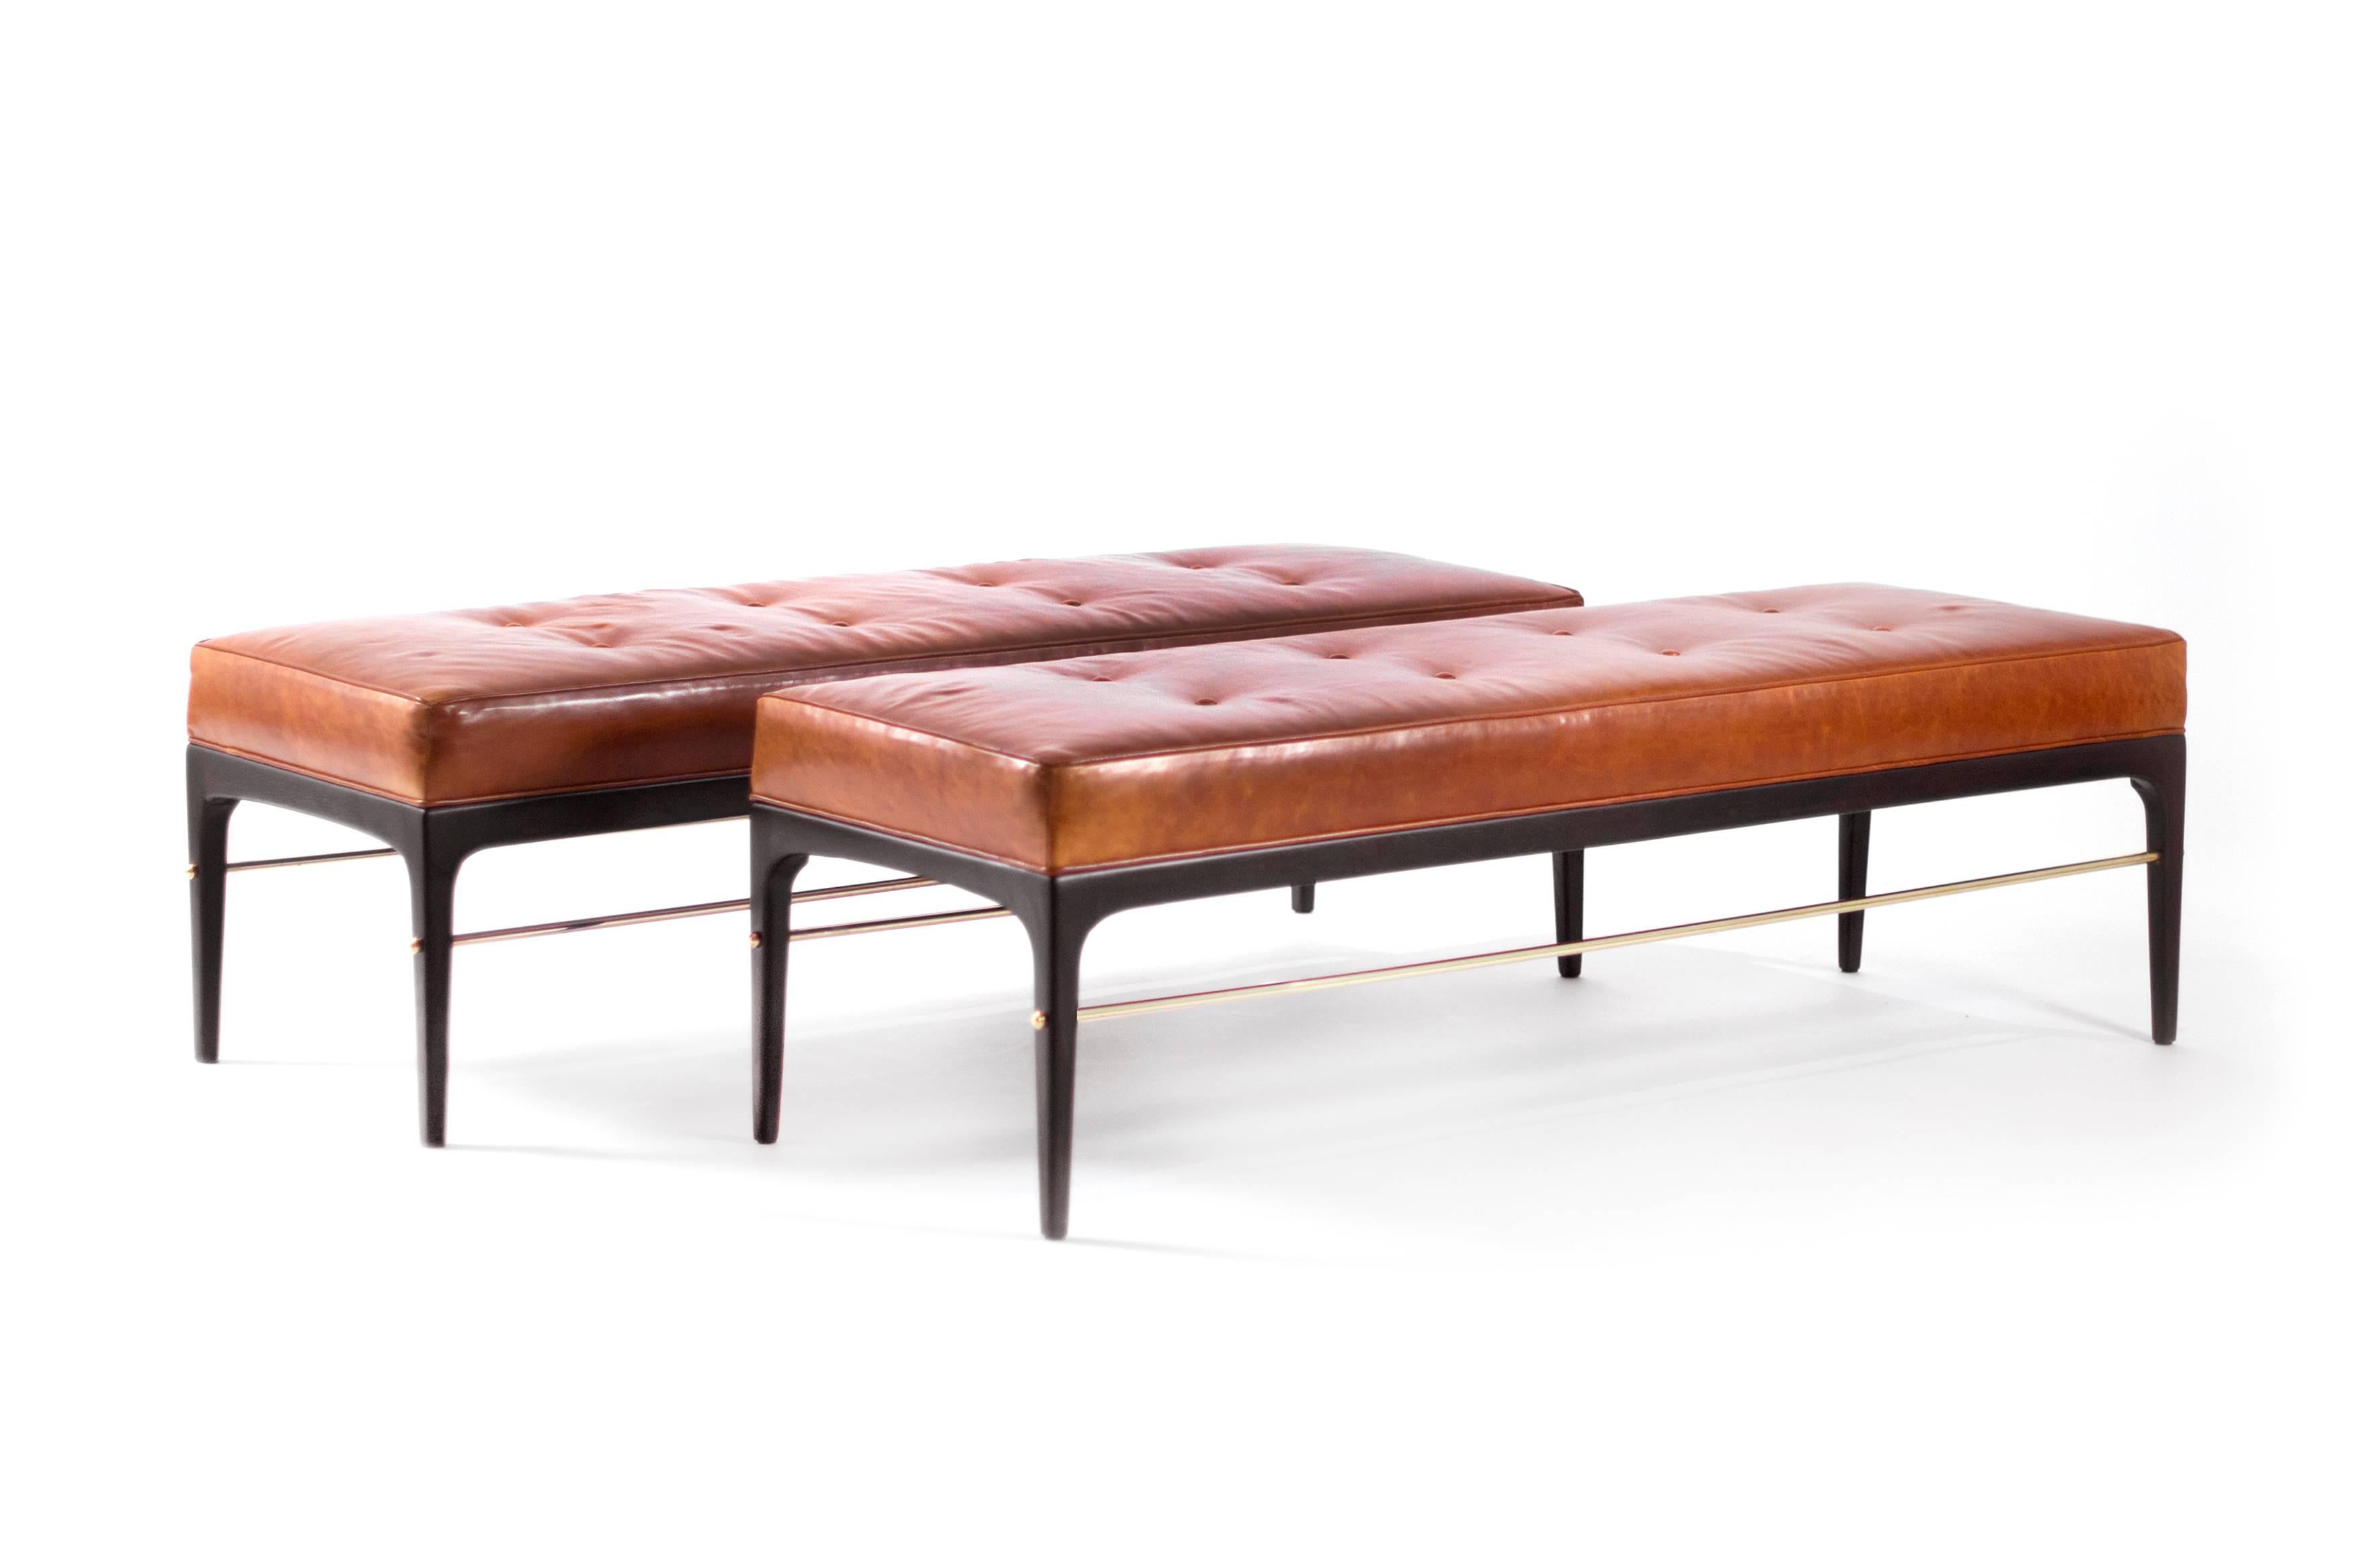 Stunning bench in the style of Edward Wormley for Dunbar. Newly fitted with brass rods, upholstered in cognac leather. Listing is for single bench.